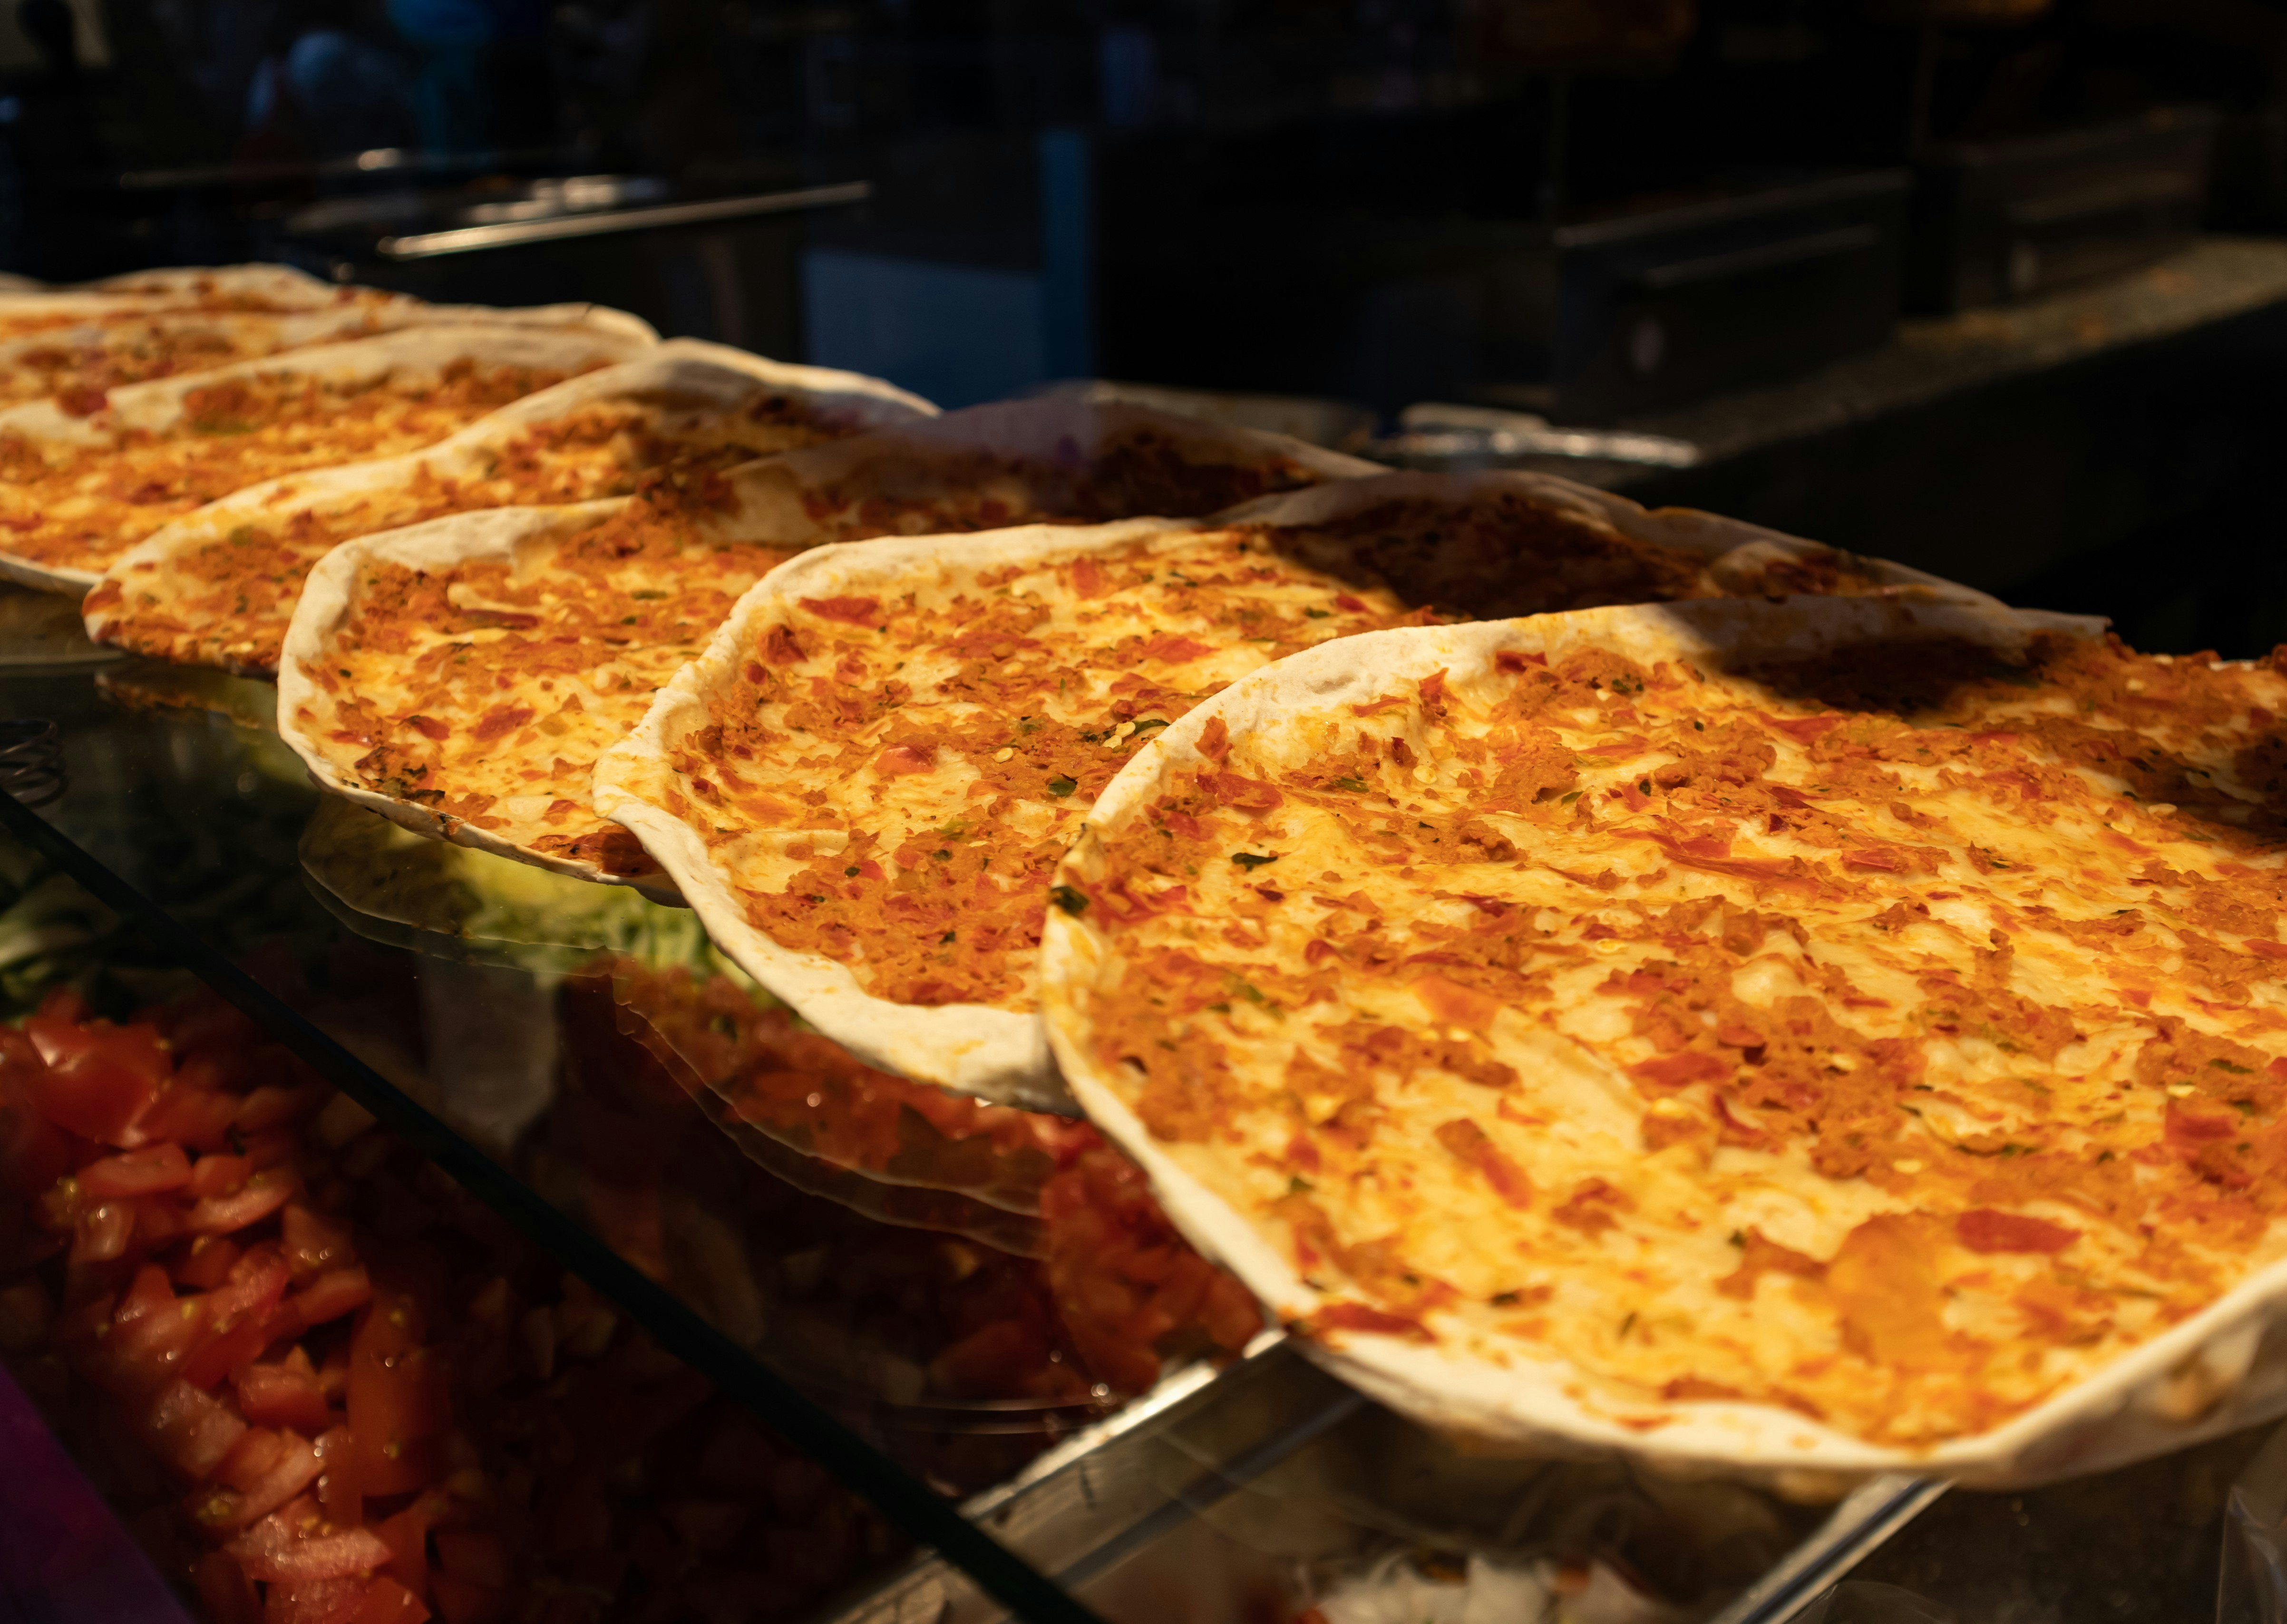 Several lahmacuns on display at a restaurant in the Netherlands. The circular, pizza-like snacks are spread across a glass counter top.